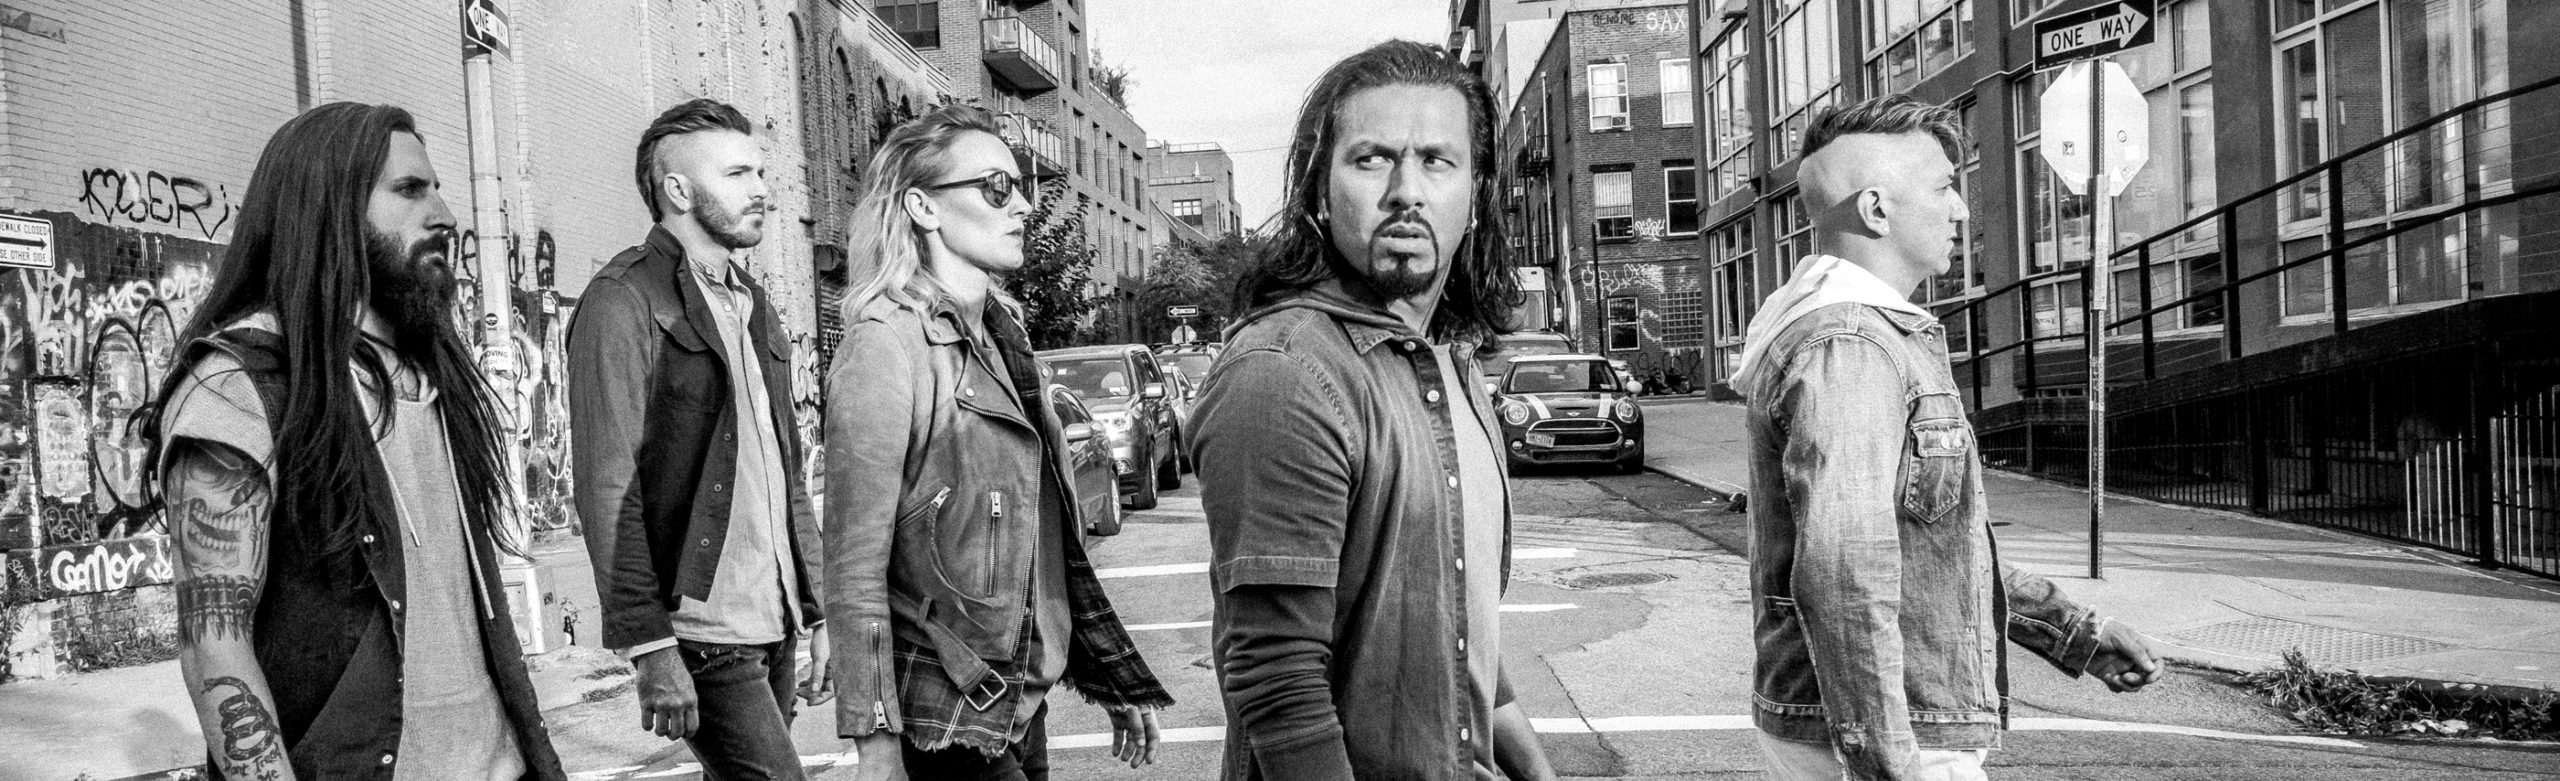 Melodic and Metallic: Pop Evil Will Bring Hard Rock to Missoula Image